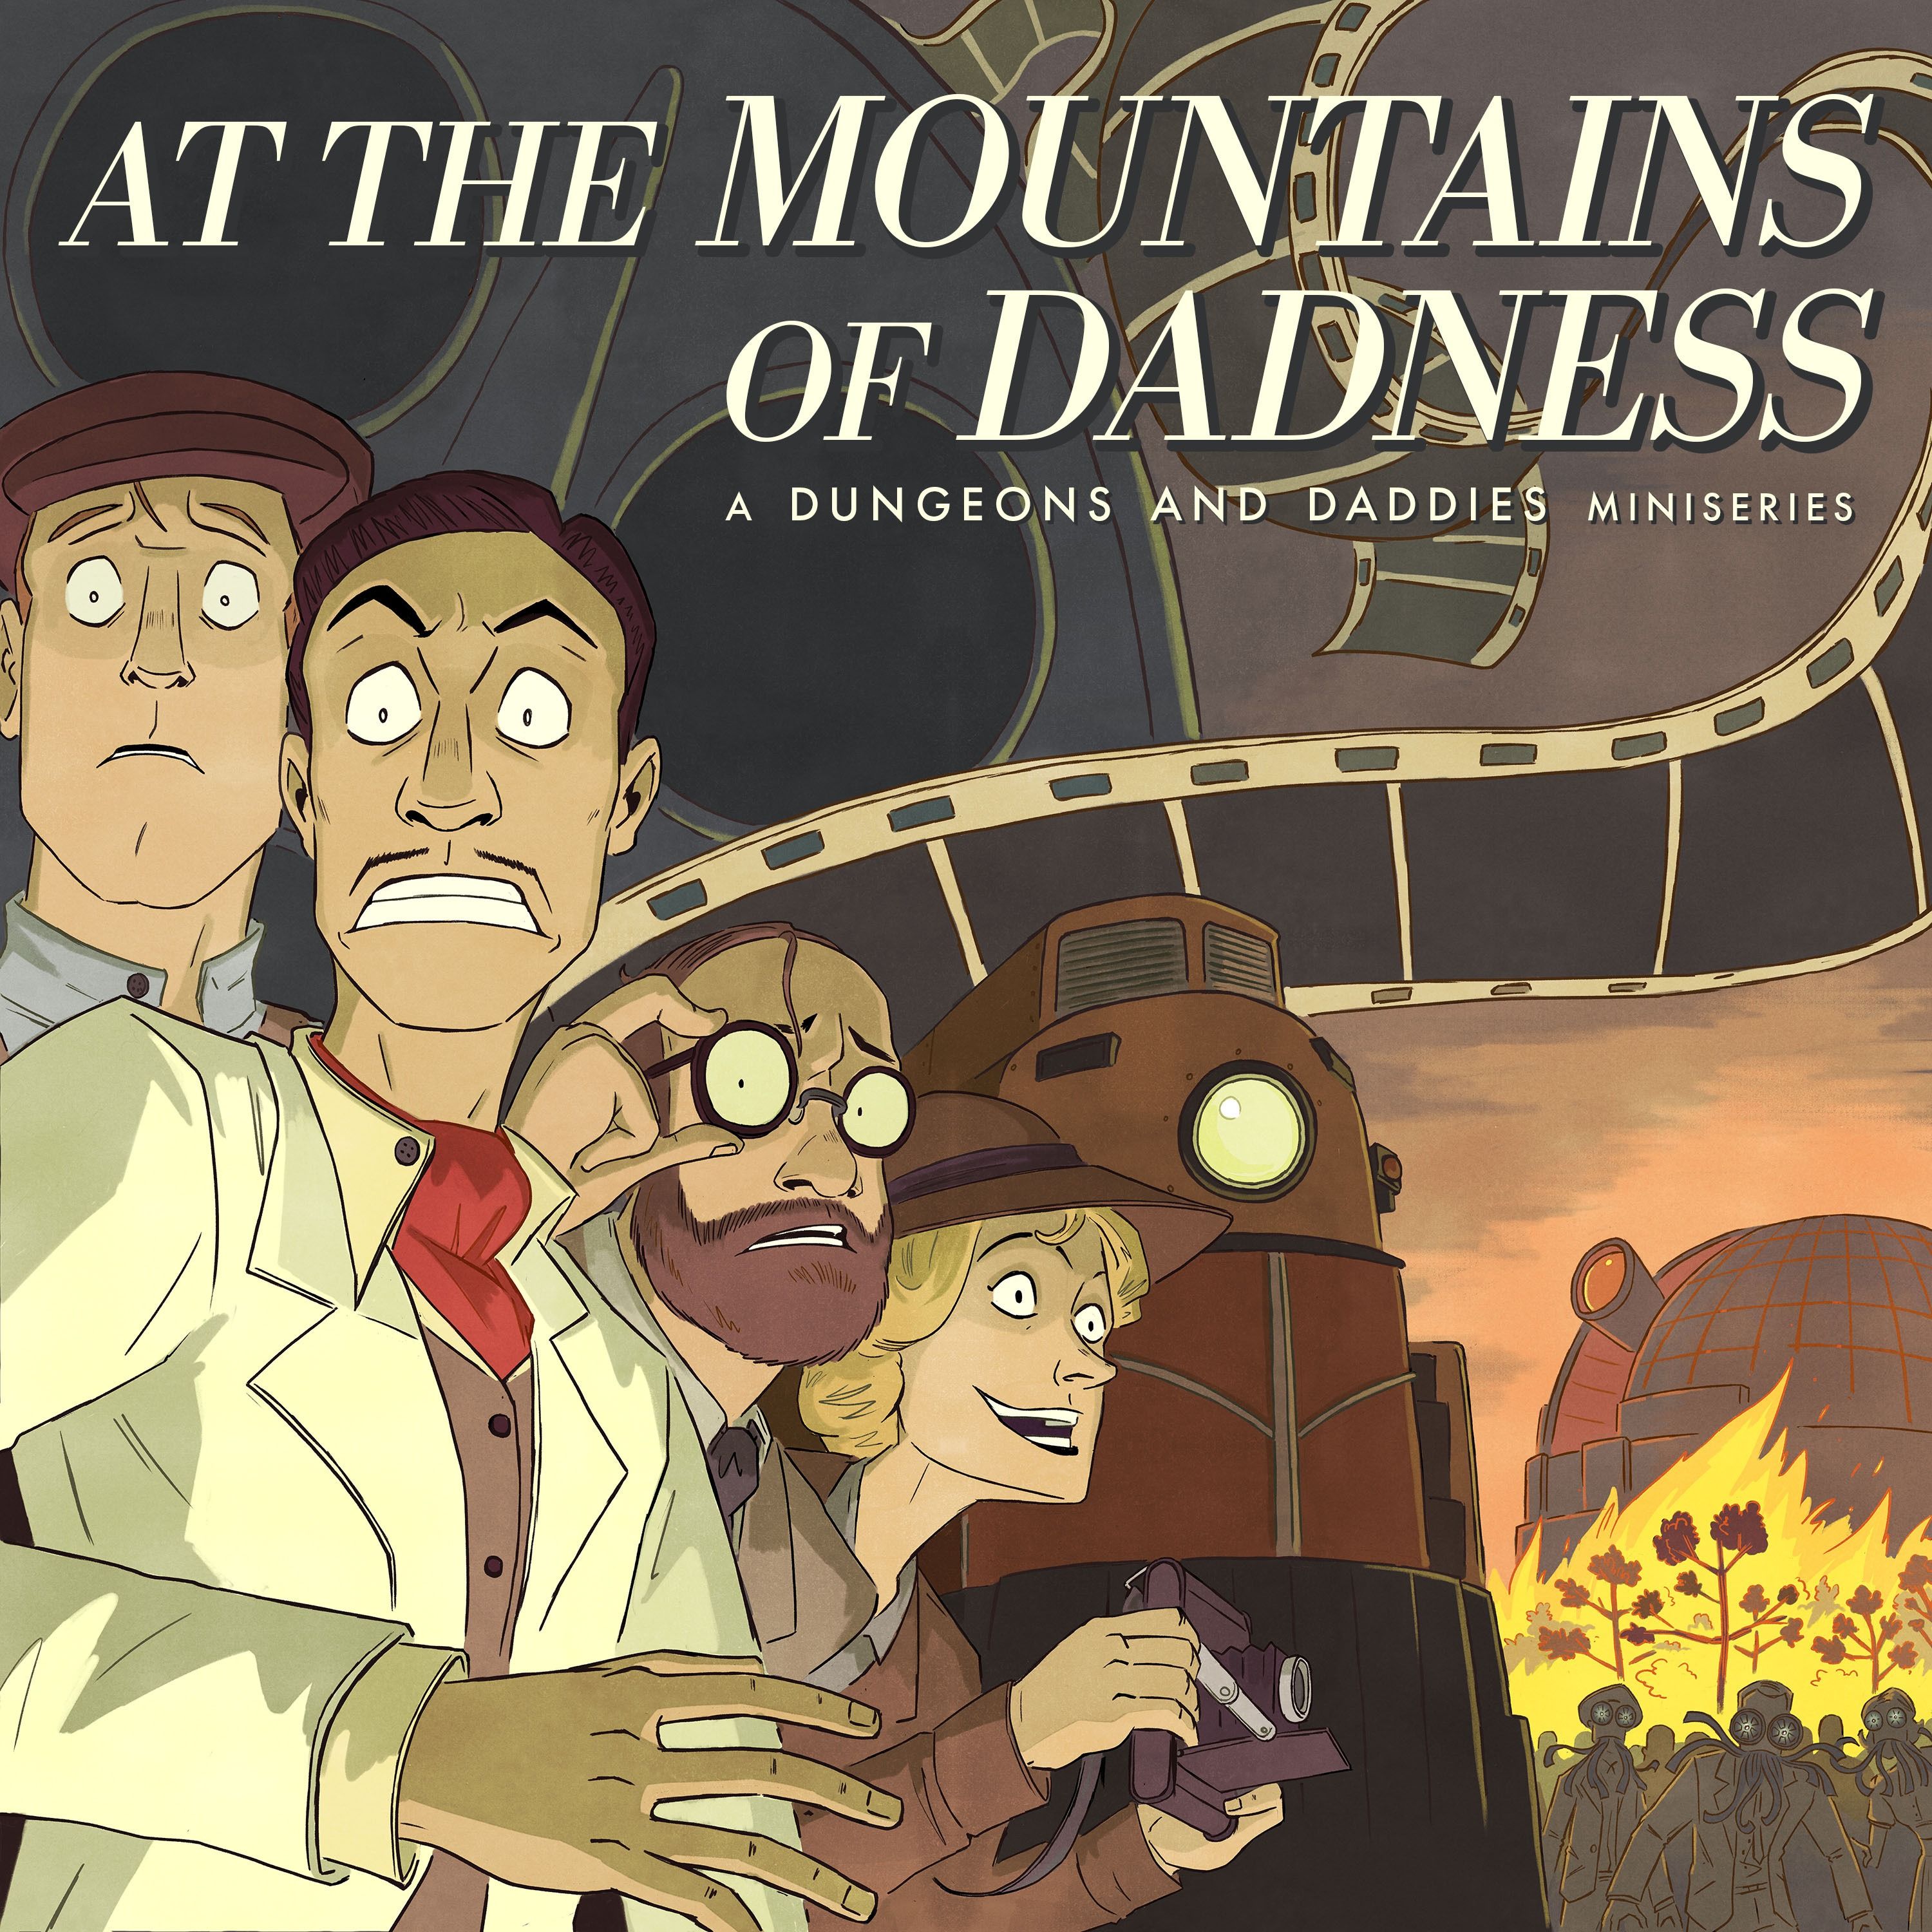 At the Mountains of Dadness Ch. 1 - Casting Call of Cthulhu